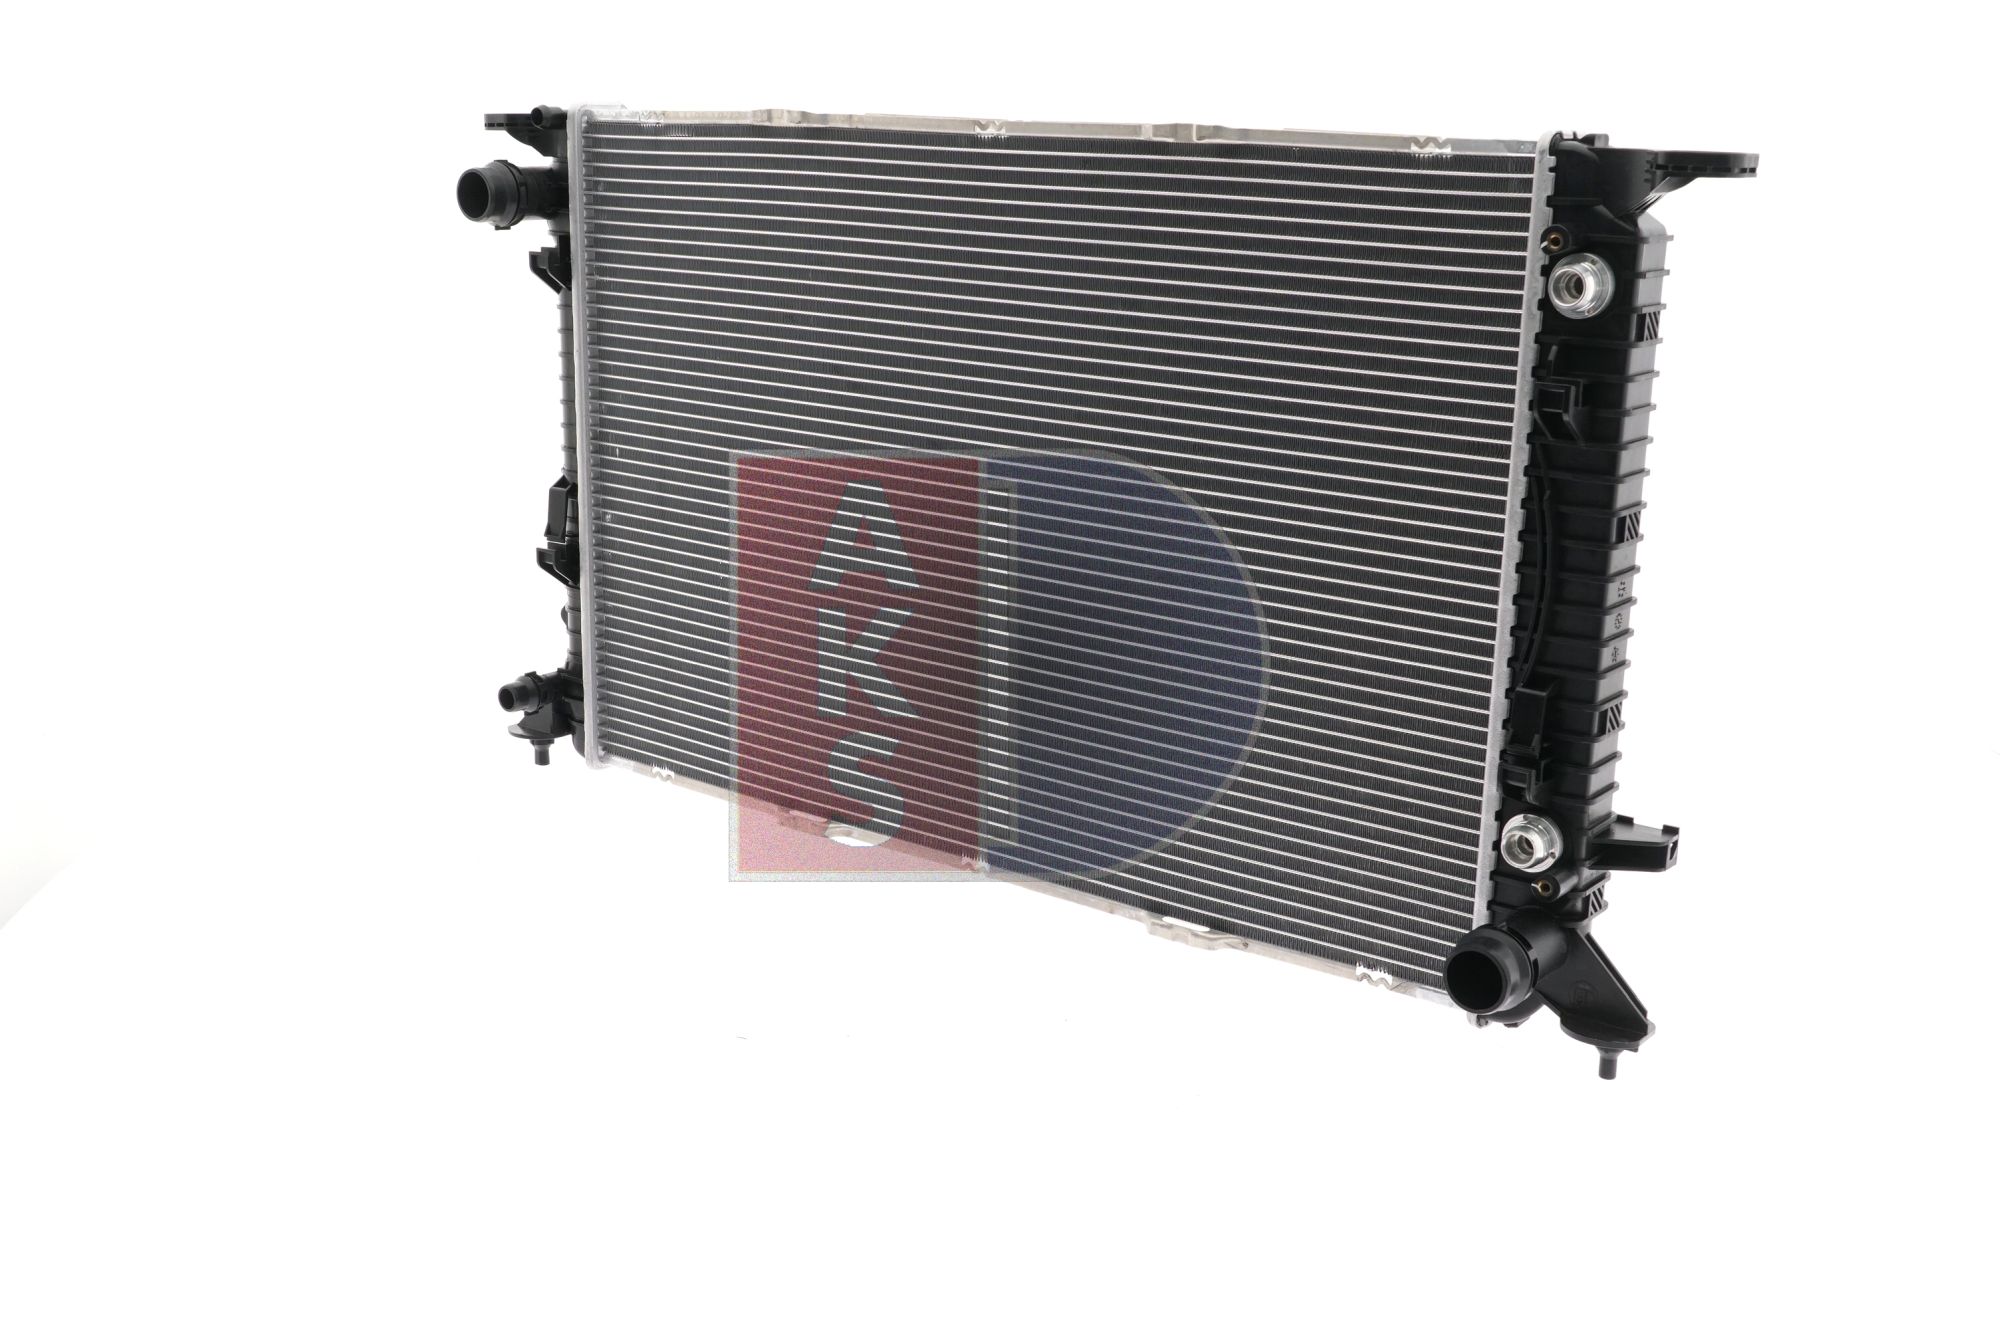 AKS DASIS 480021N Engine radiator Aluminium, for vehicles with/without air conditioning, 720 x 474 x 36 mm, for automatic transmission, Brazed cooling fins